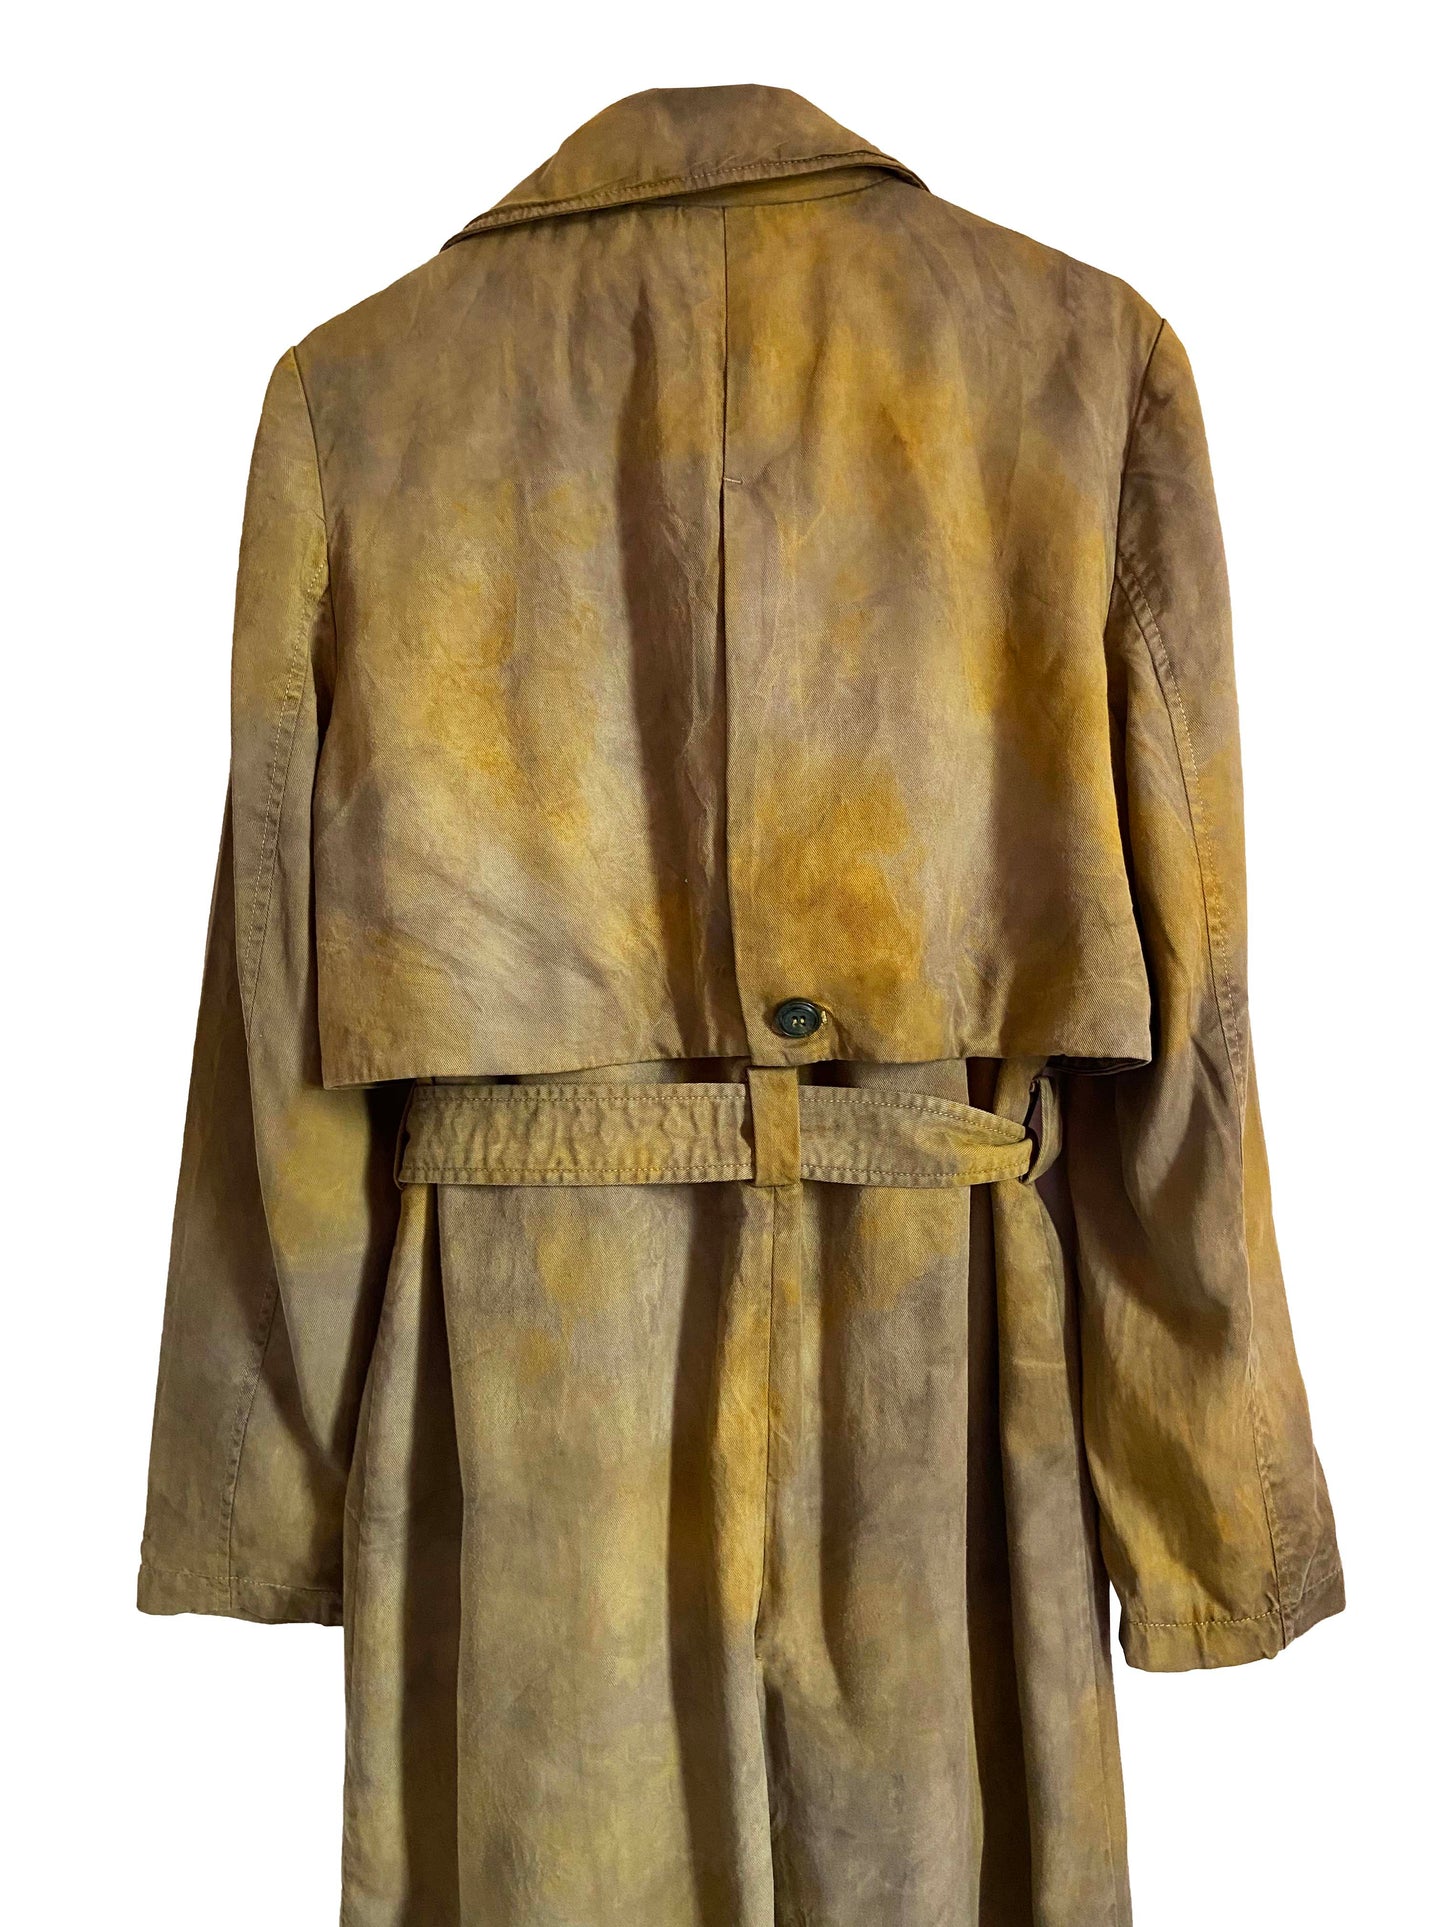 Ecoprint brown beige tie and dye trench coat